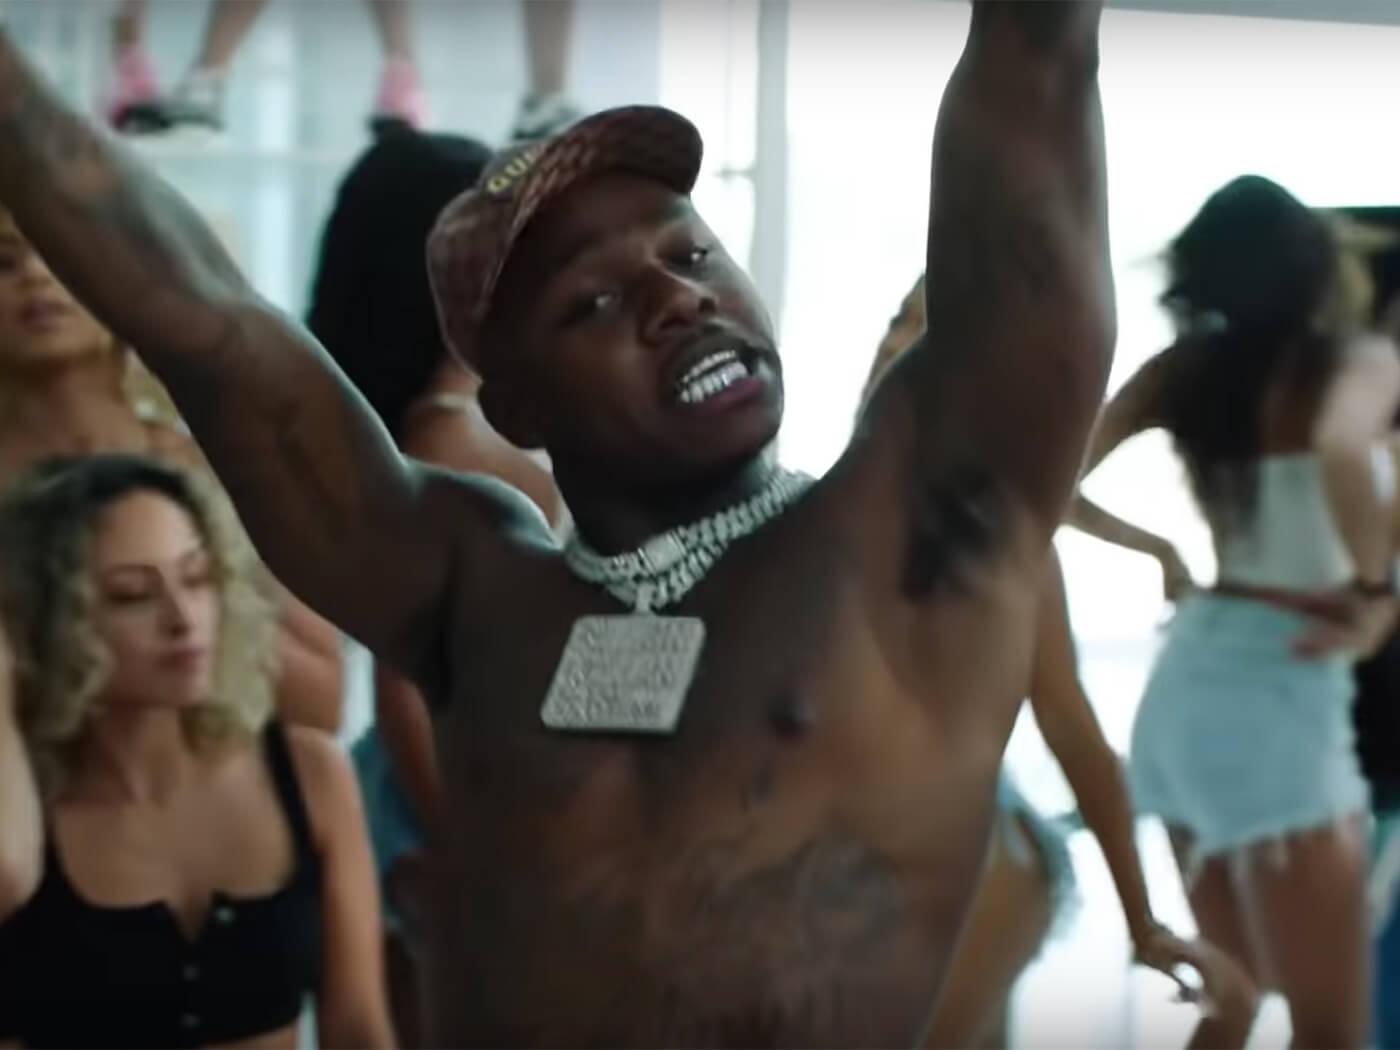 Watch DaBaby's raunchy new video for “Vibez”